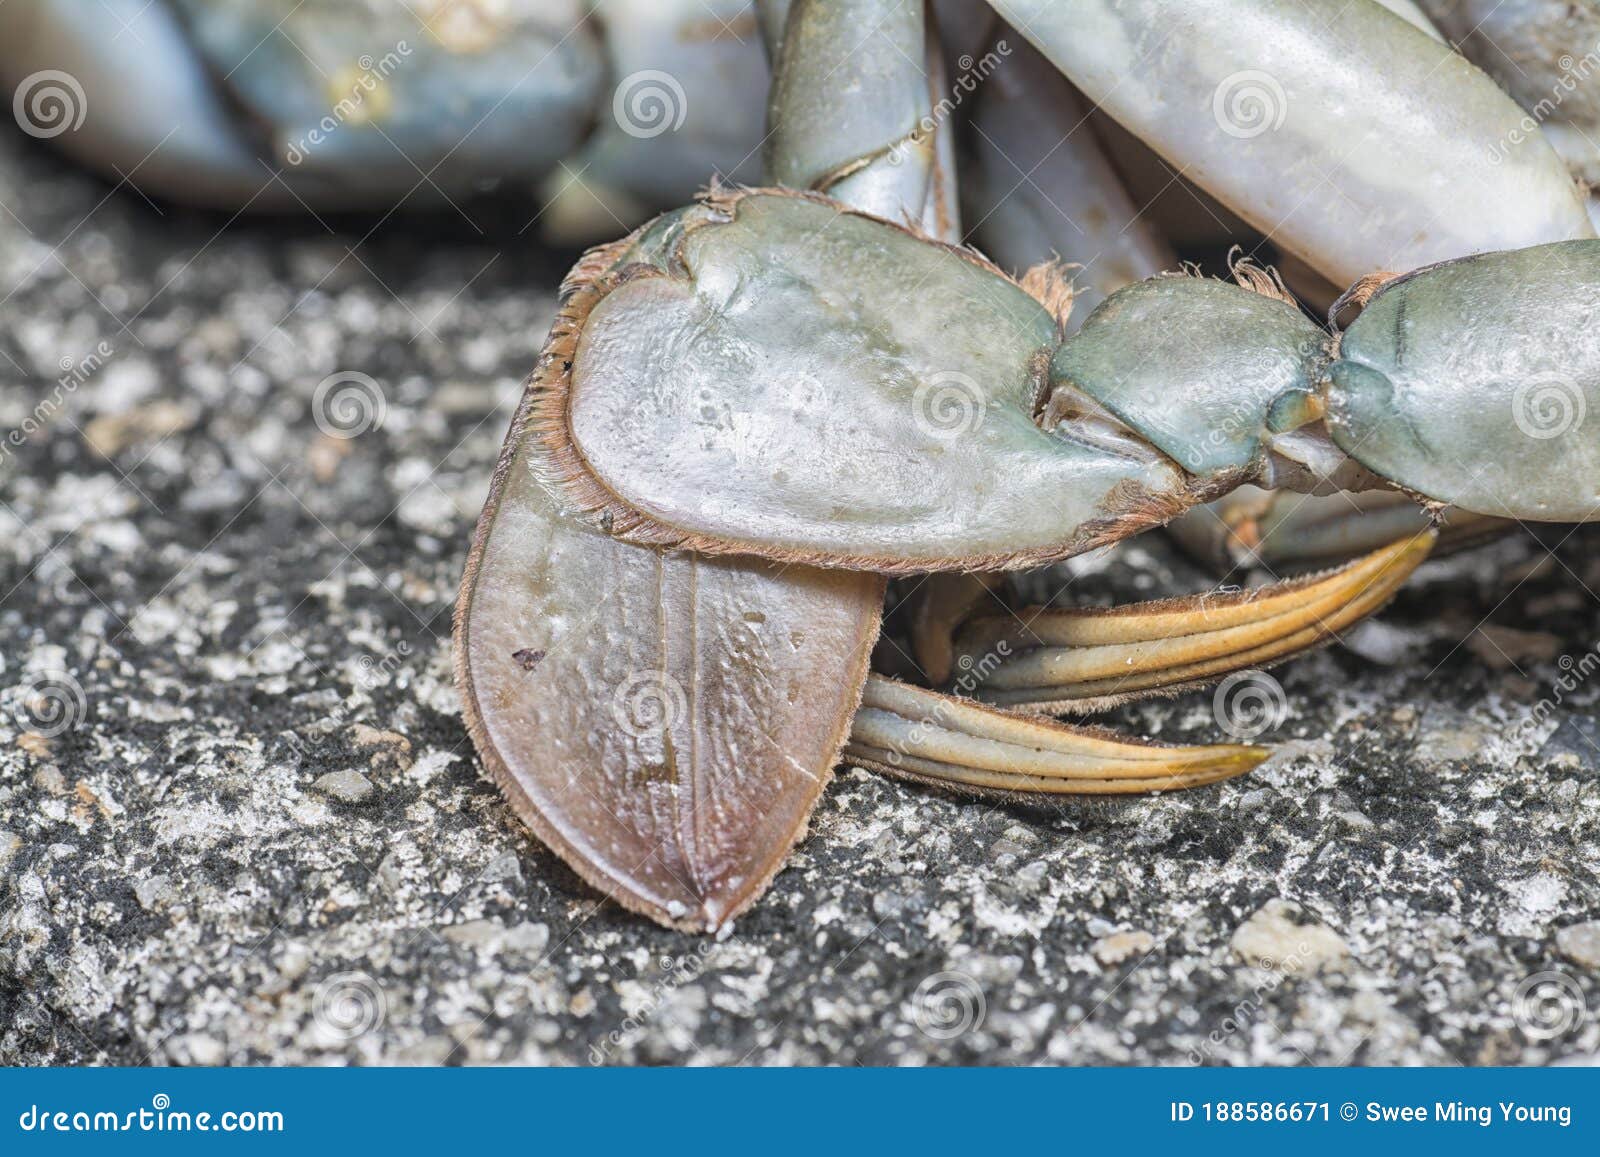 Close Shot of the Common Brown Rock Crab Stock Image - Image of carapace,  arthropod: 188586671